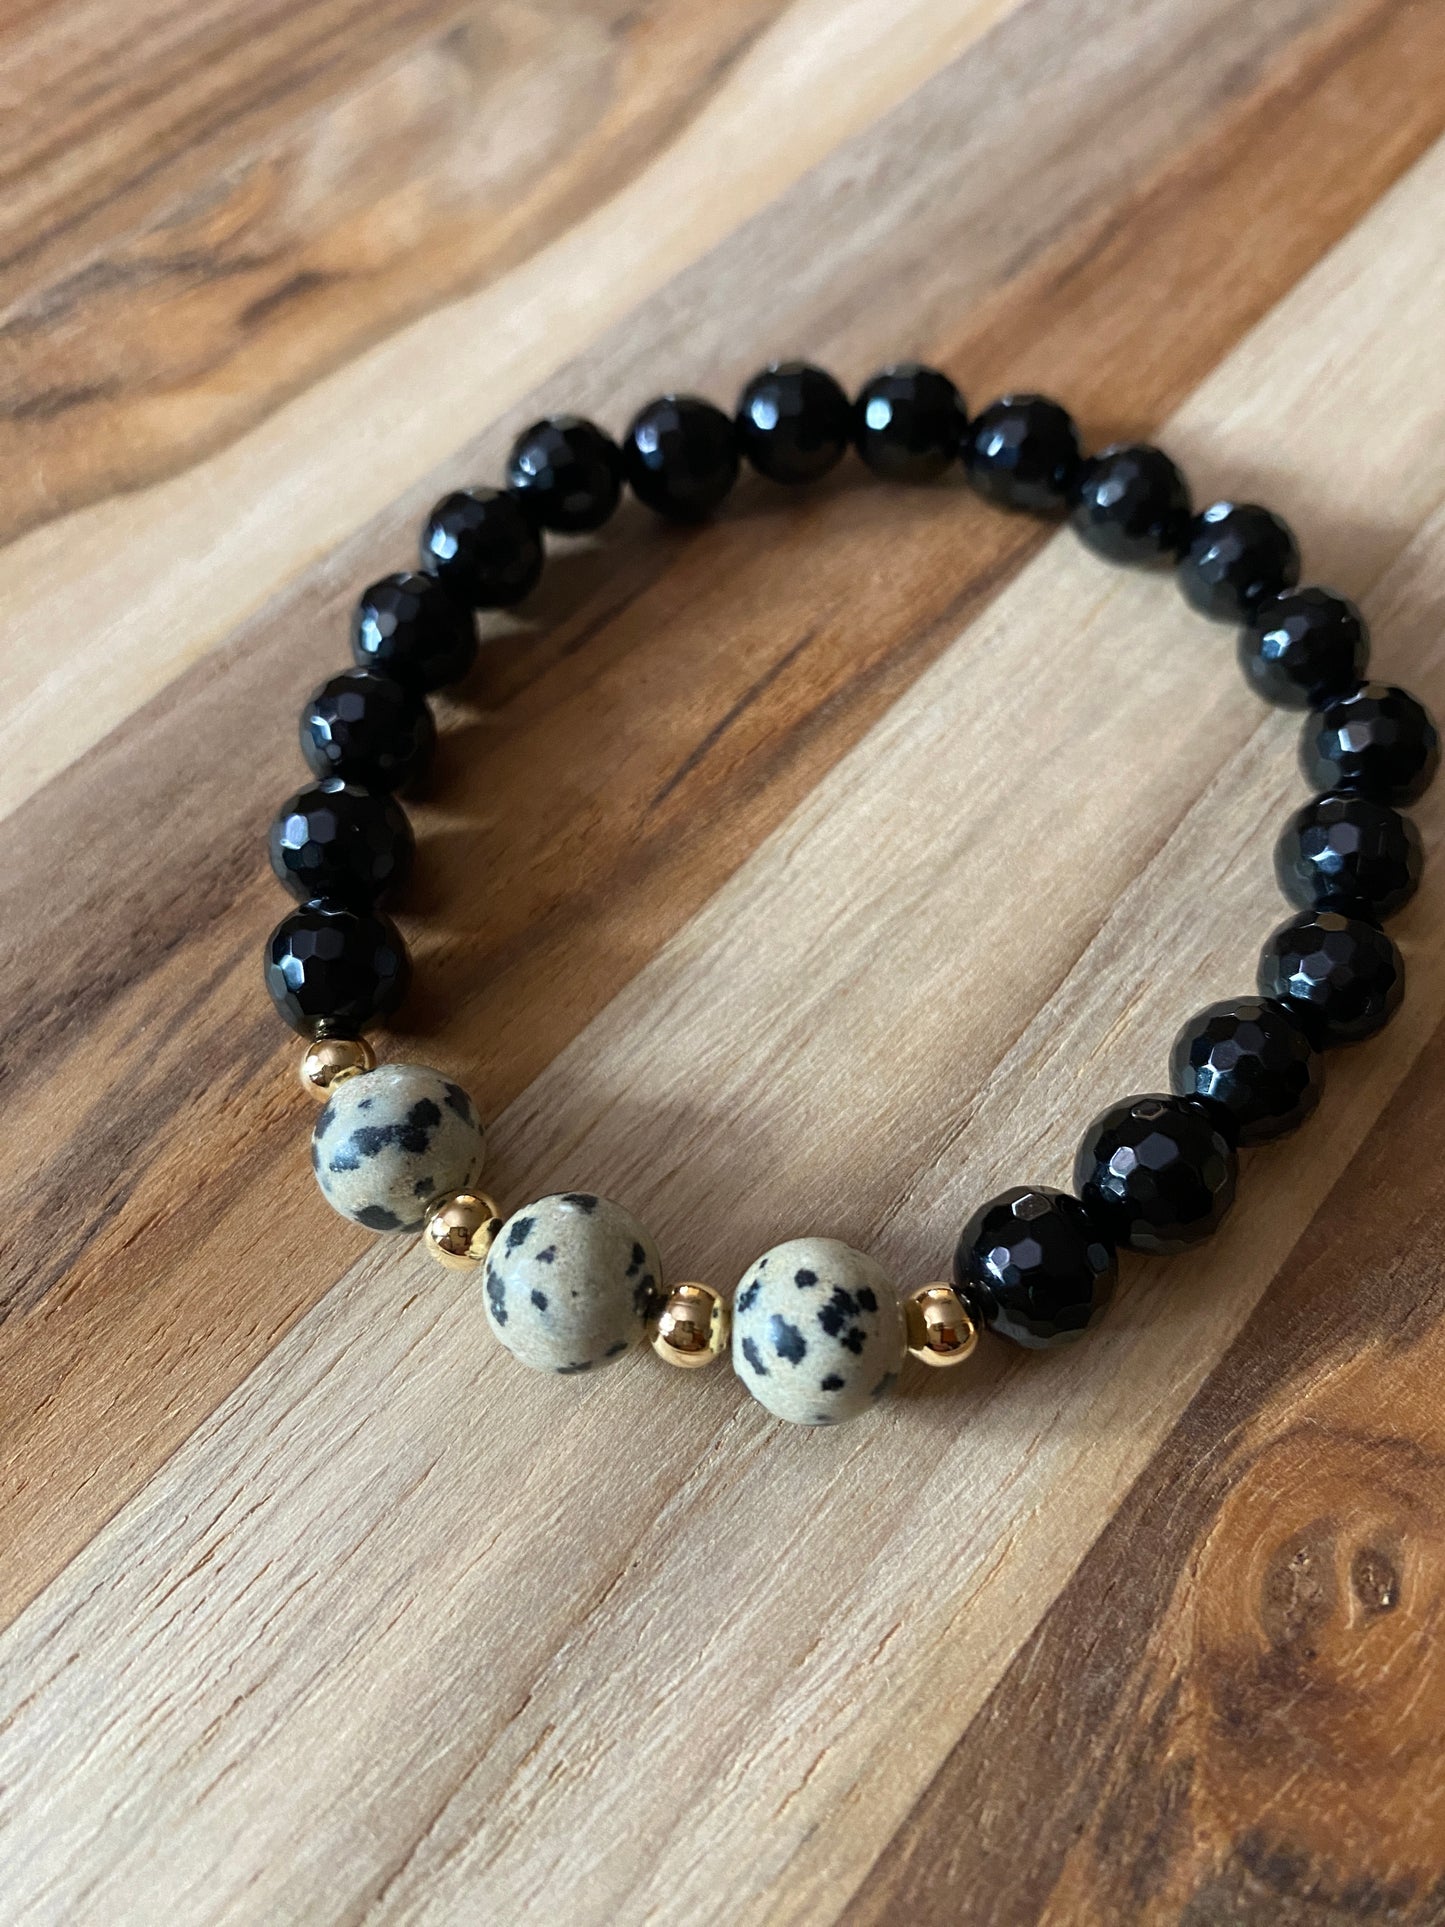 Faceted Black Onyx Beaded Stretch Bracelet with Dalmatian Jasper Beads